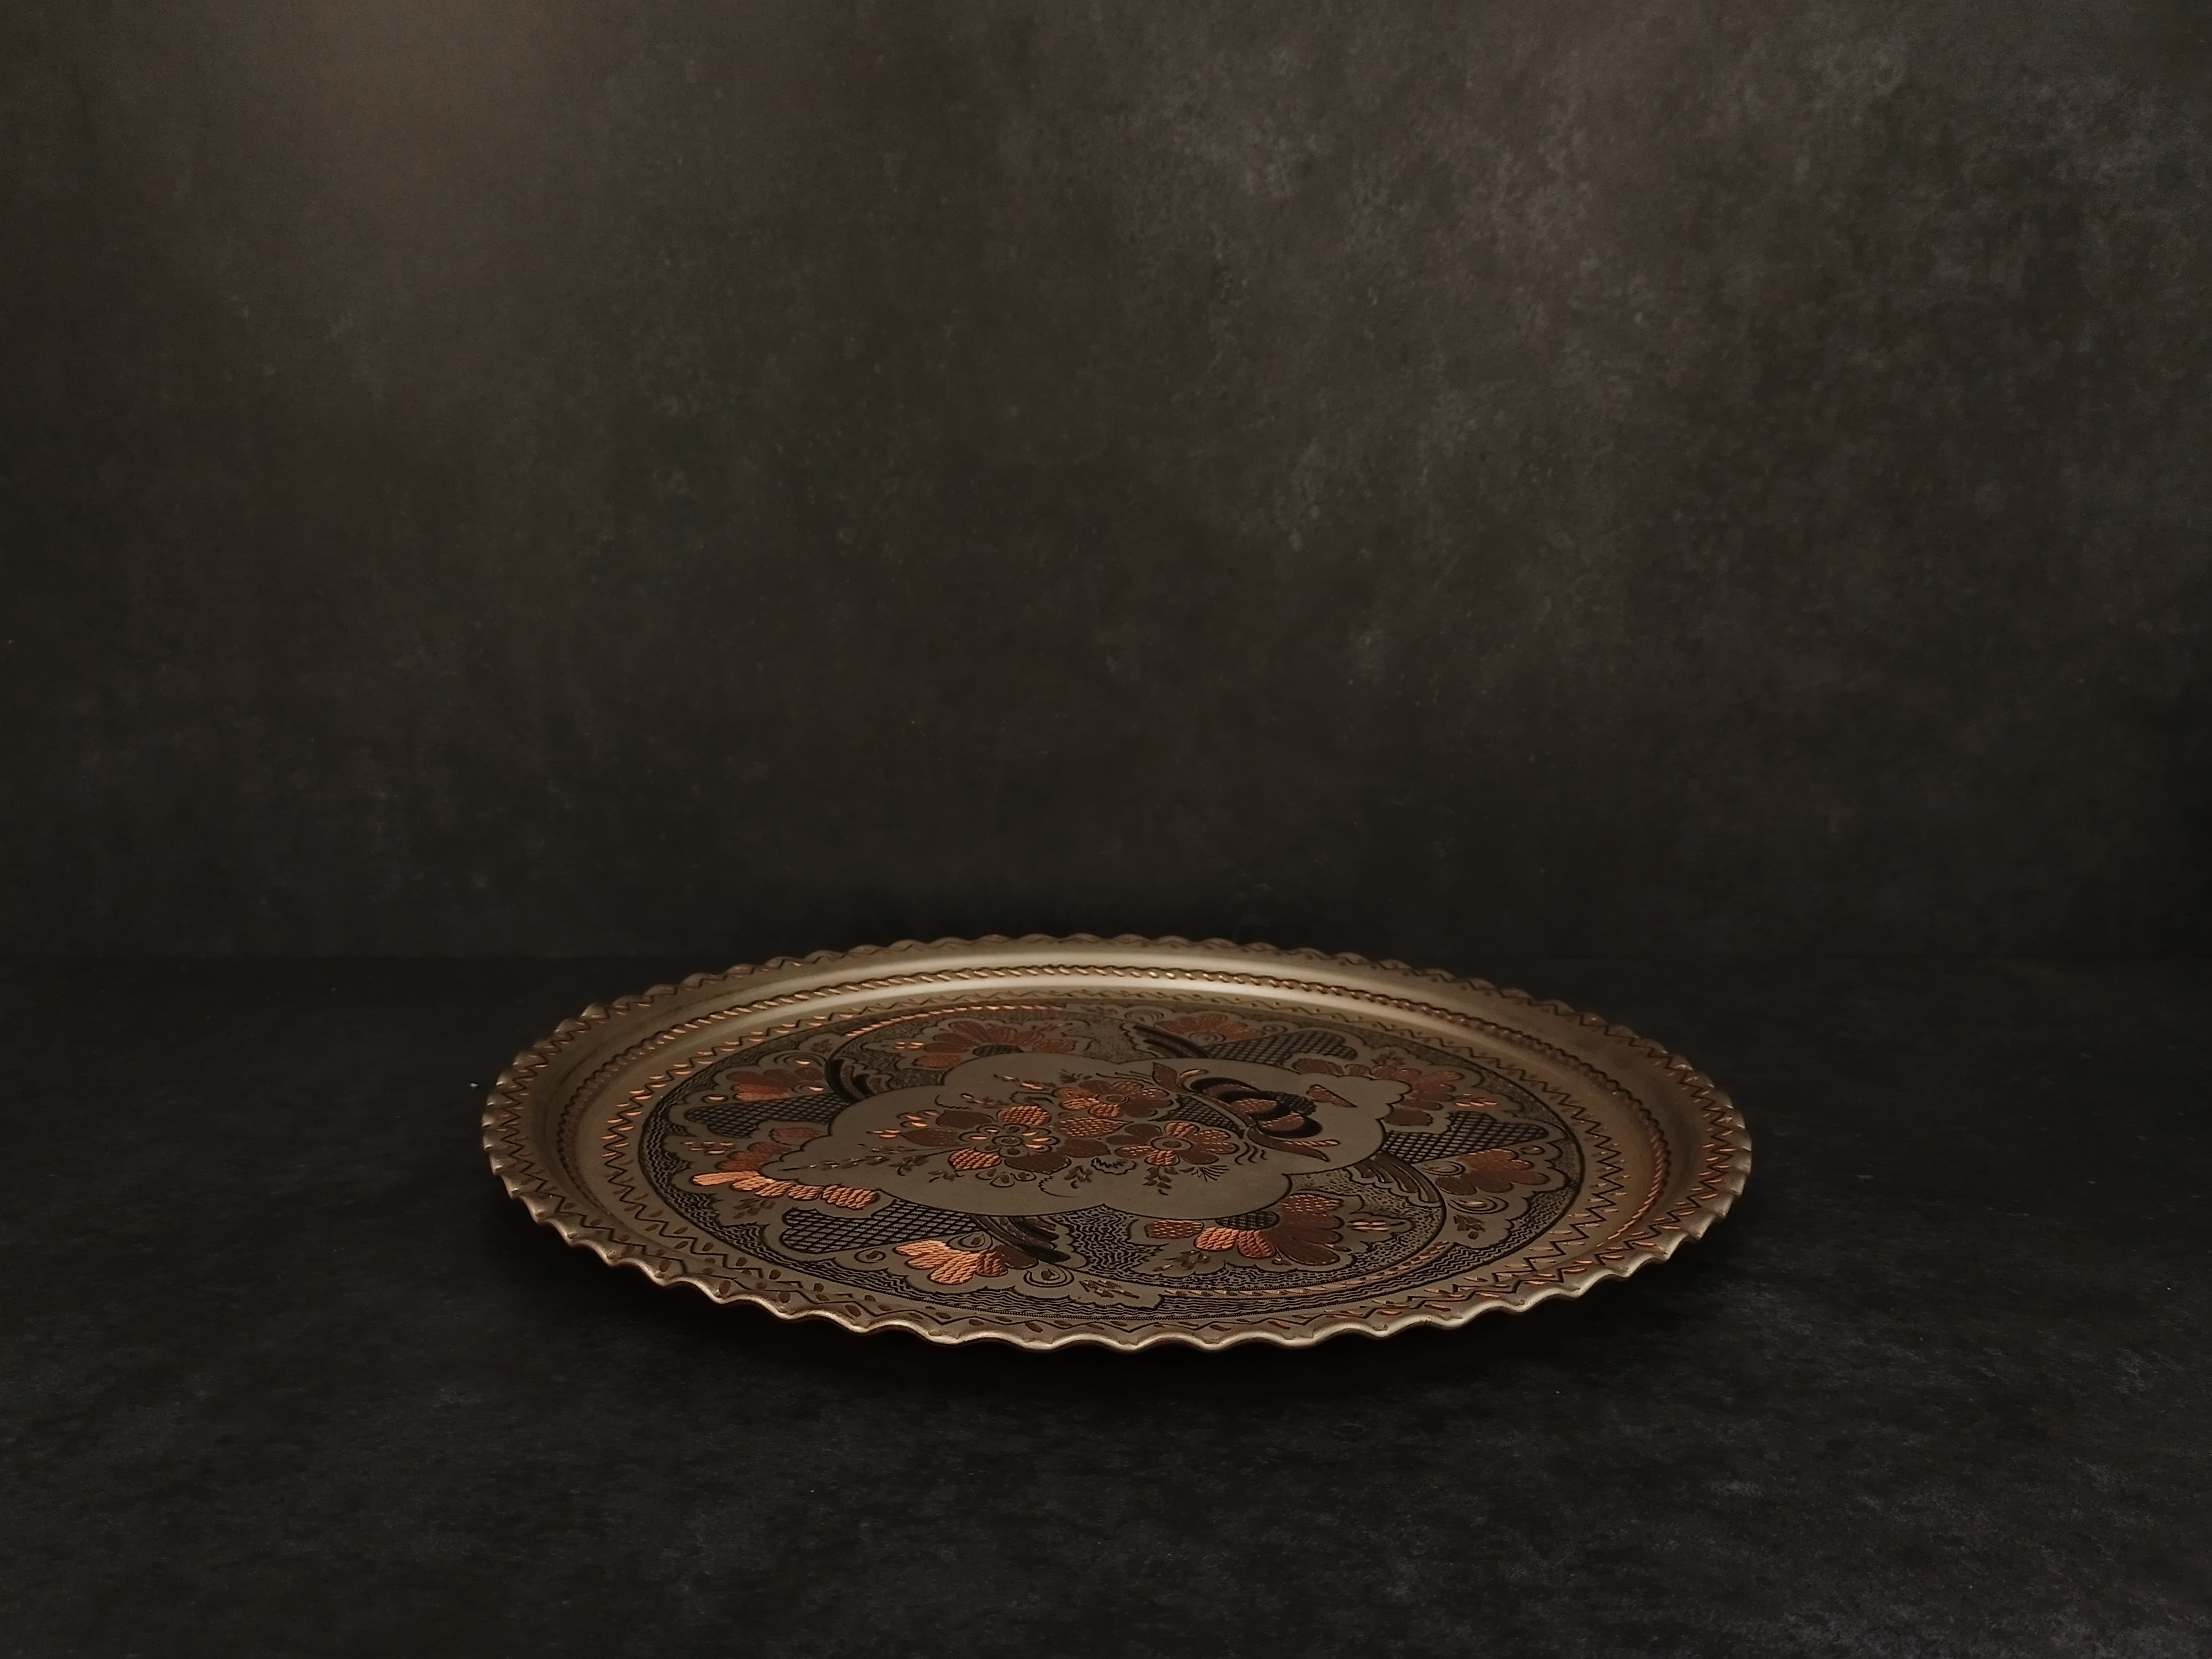 Turkish Handmade Copper Tray, Circular Serving Tray, Royal Style Decorated Coffee Table Tray